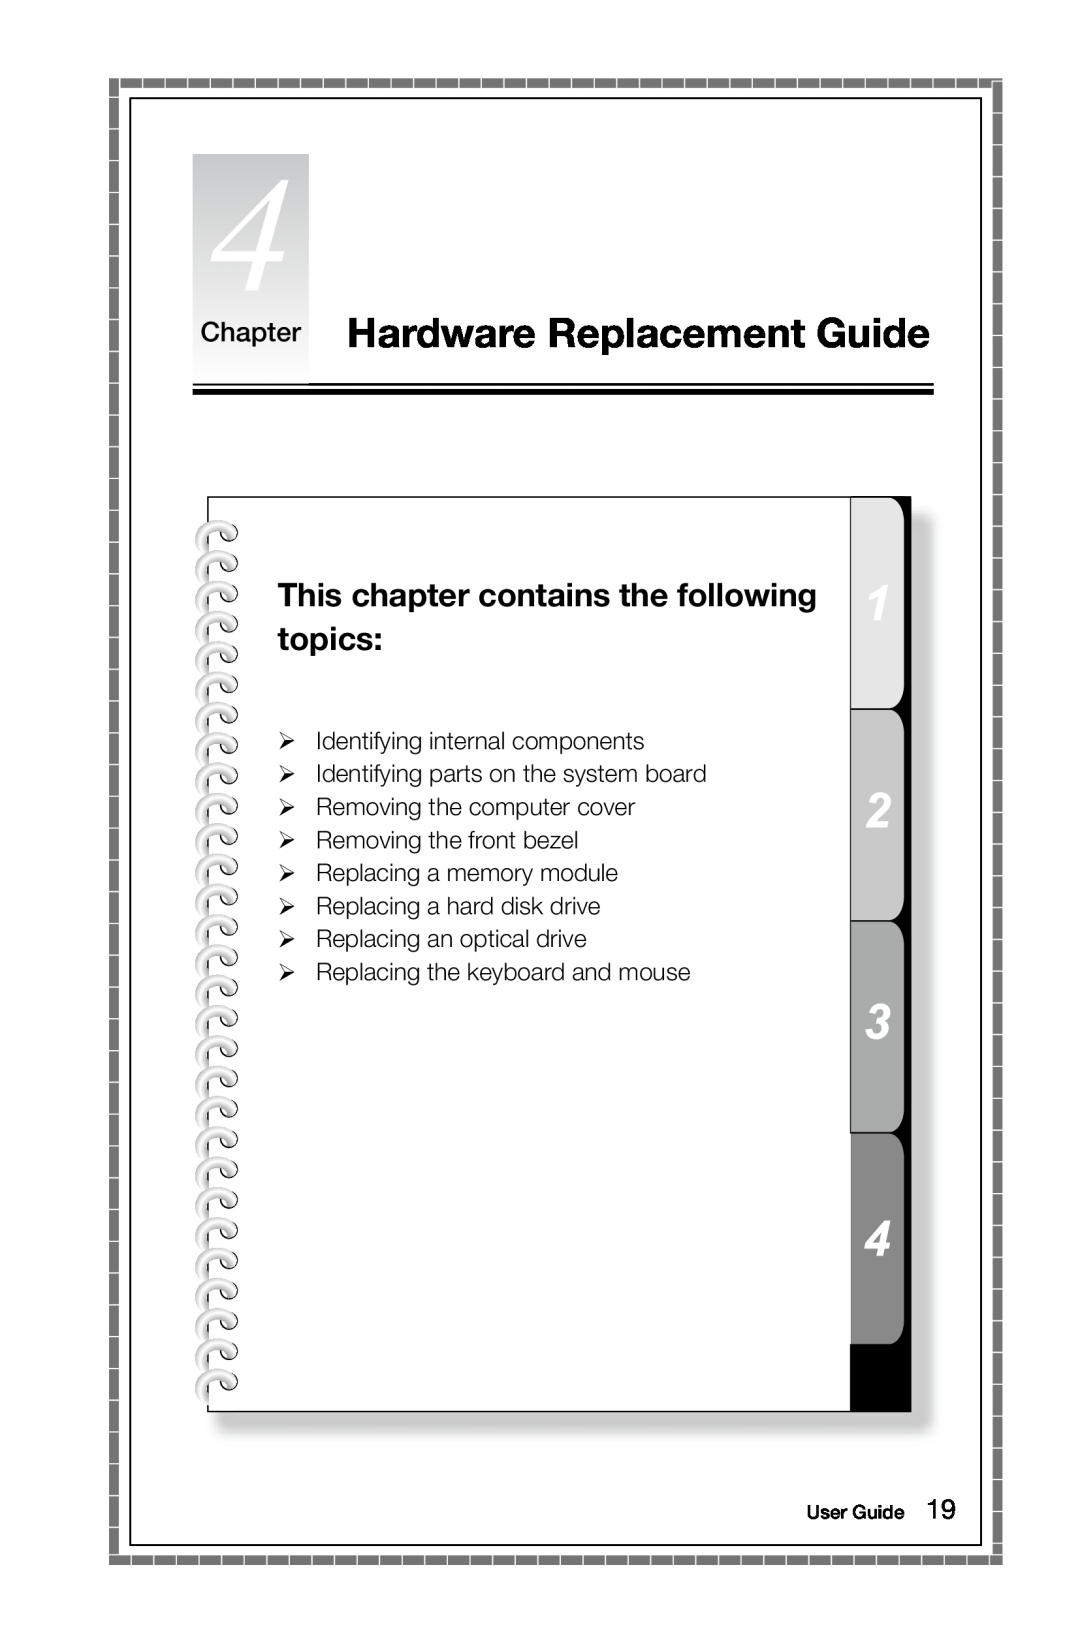 Lenovo H5S Chapter Hardware Replacement Guide, This chapter contains the following topics,  Removing the front bezel 